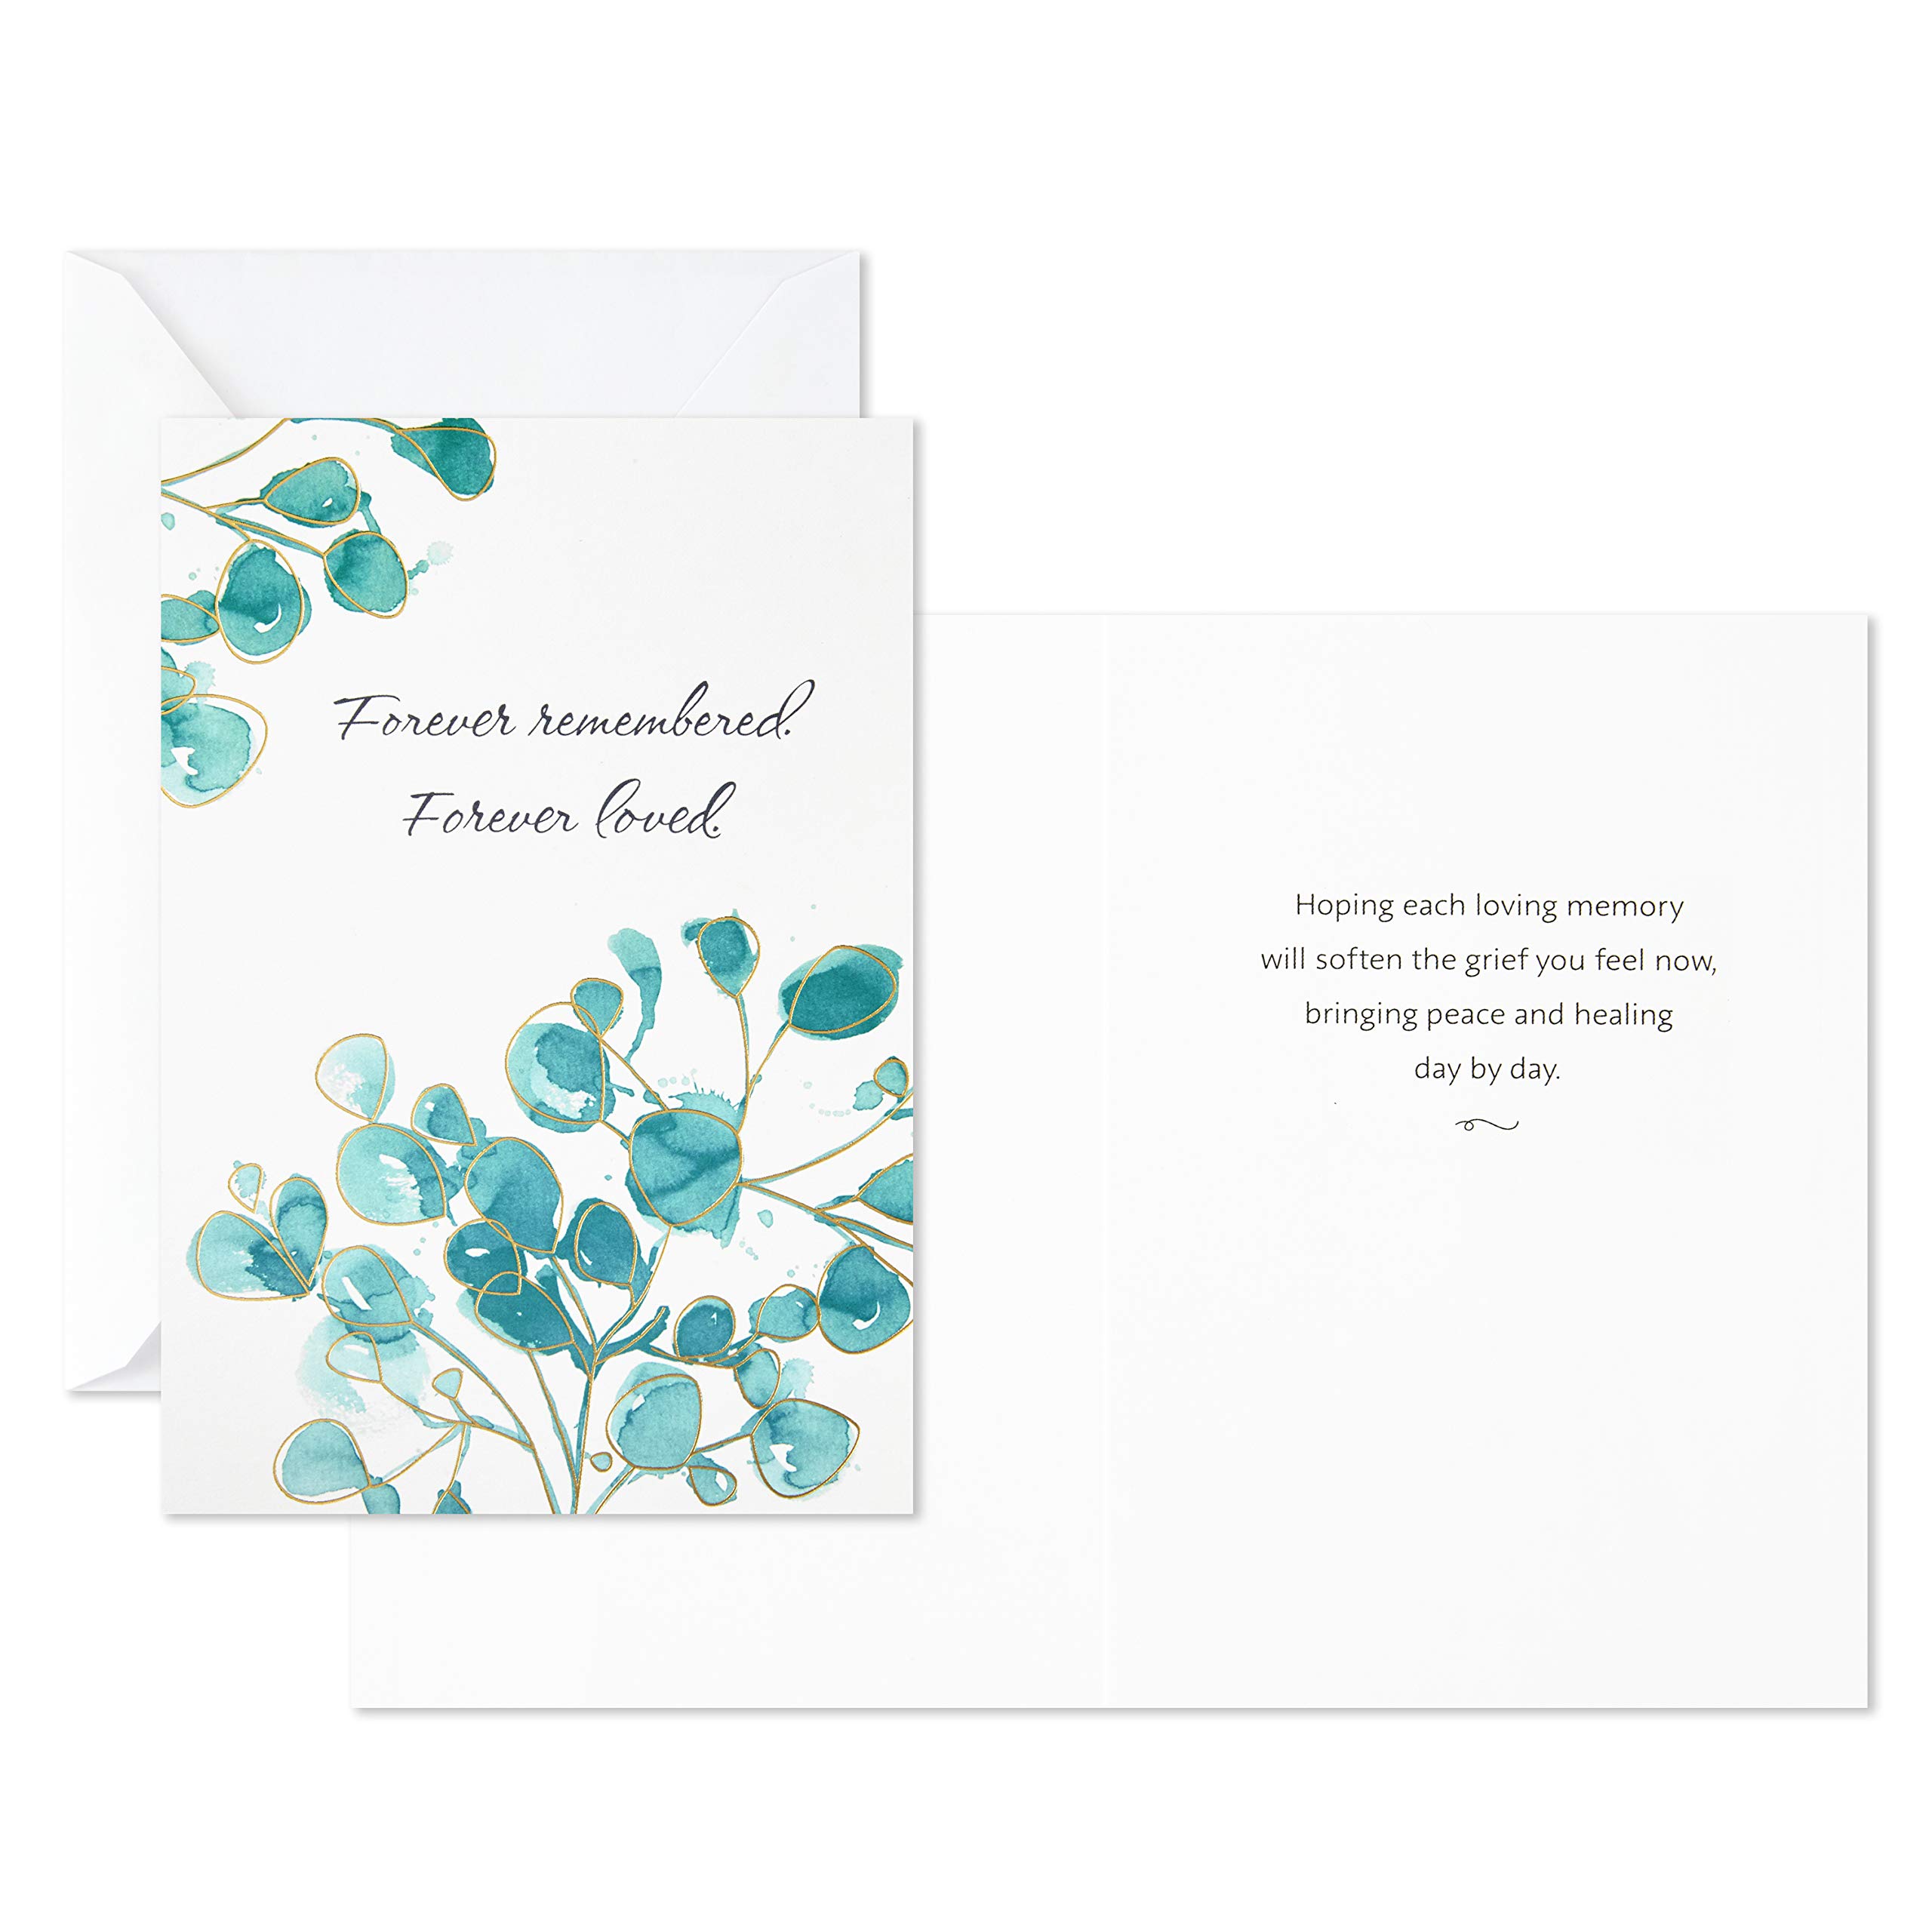 Hallmark Sympathy Cards Assortment, Watercolor Nature (12 Assorted Thinking of You Cards with Envelopes)